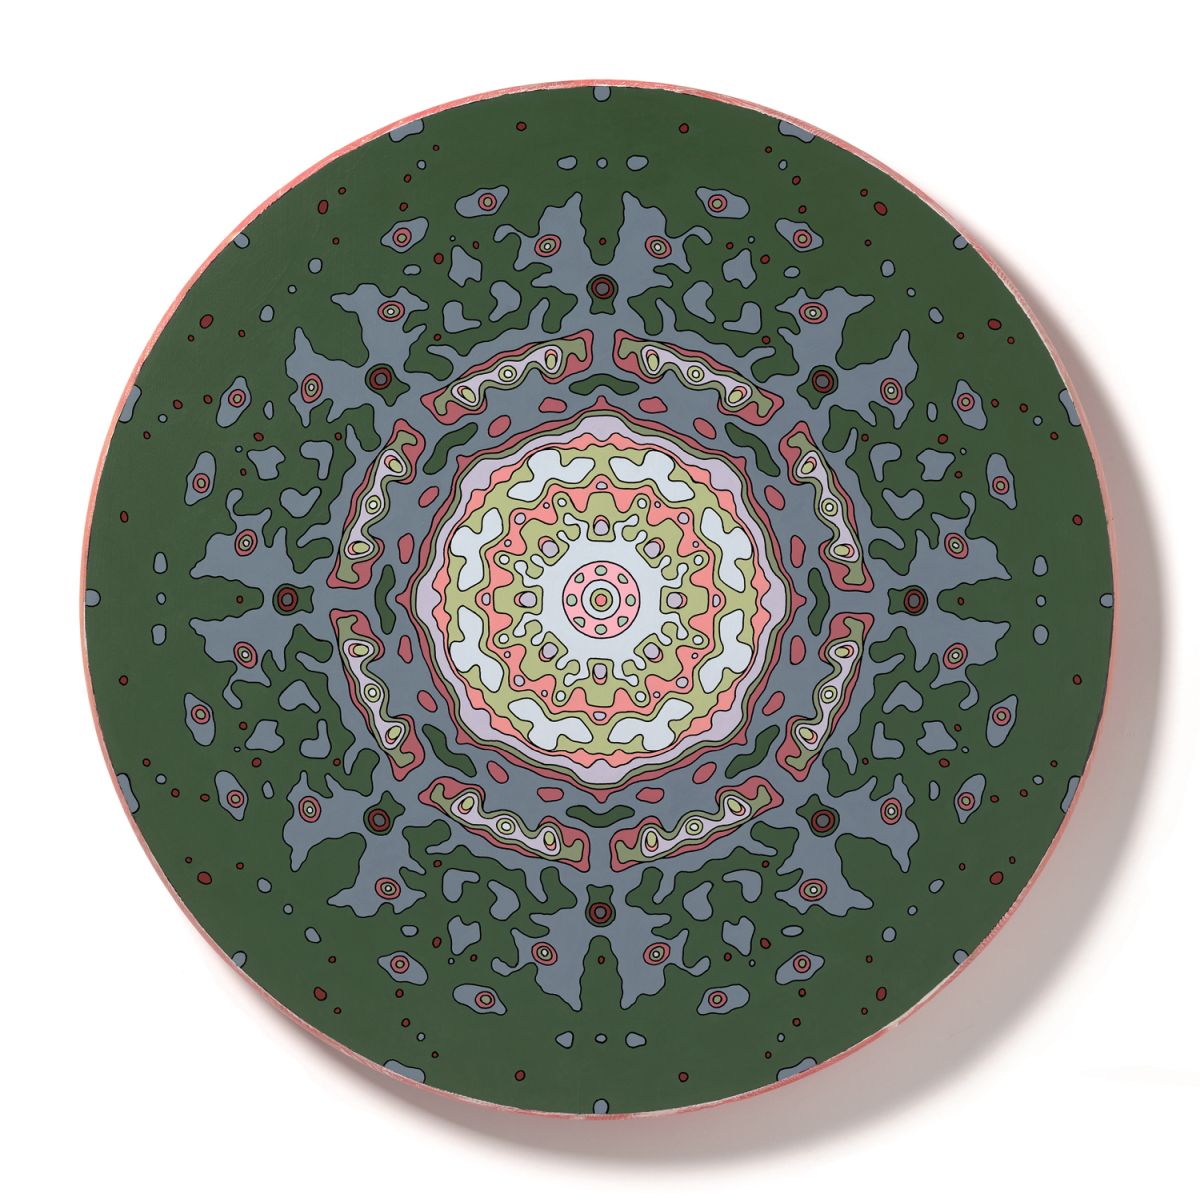 <br/>Tybo Bedrock, 2023<br/>24" diameter<br/>acrylic, opaque marker and glitter on wood